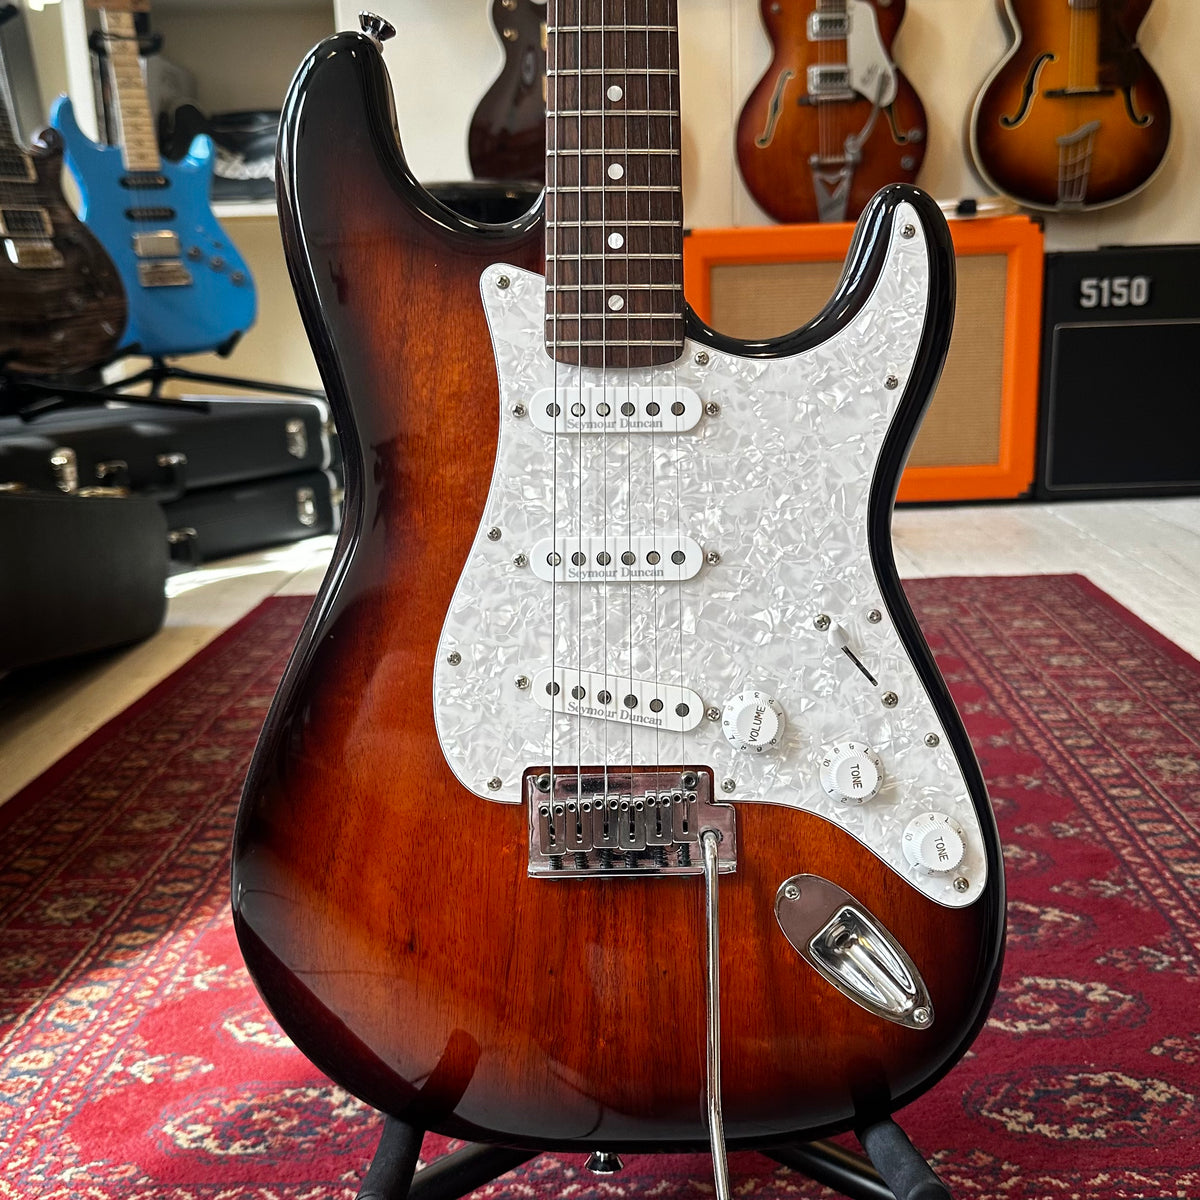 Fender Made in Korea Stratocaster With Seymour Duncan Pickups - Preowned